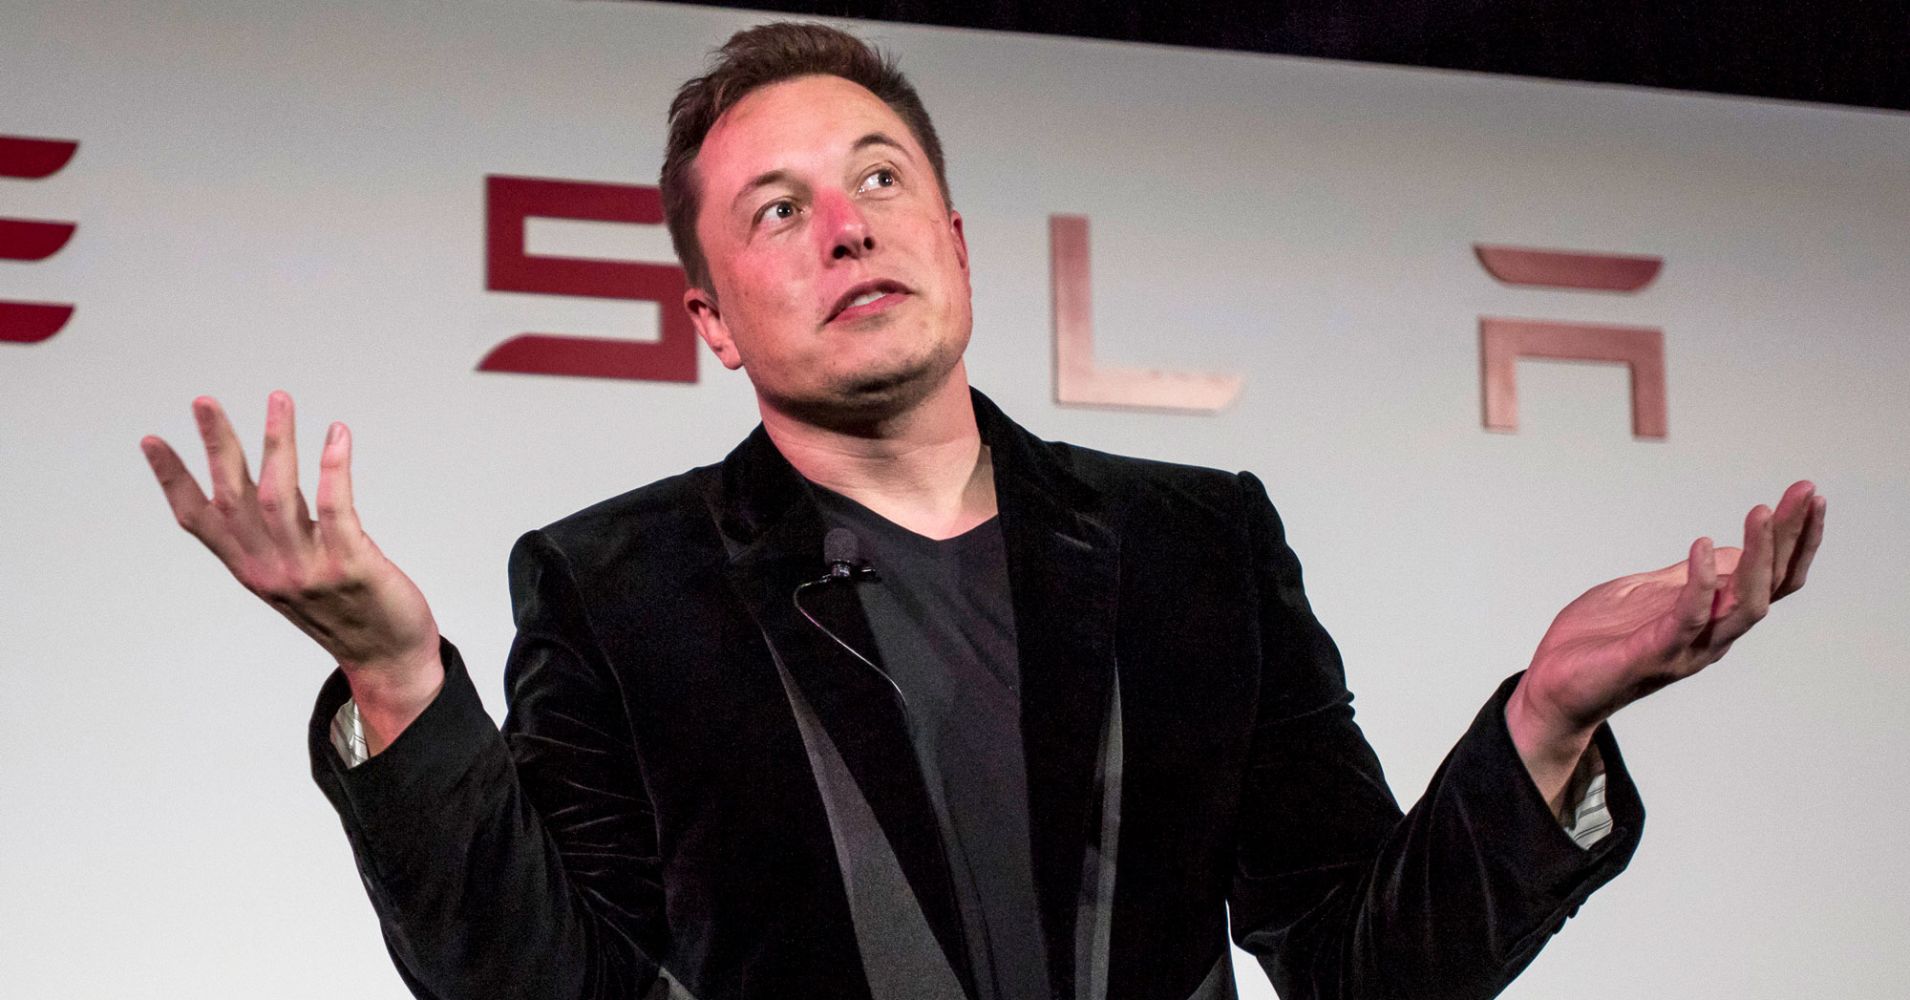 Elon Musk could have avoided SEC lawsuit by signing a no-guilt settlement